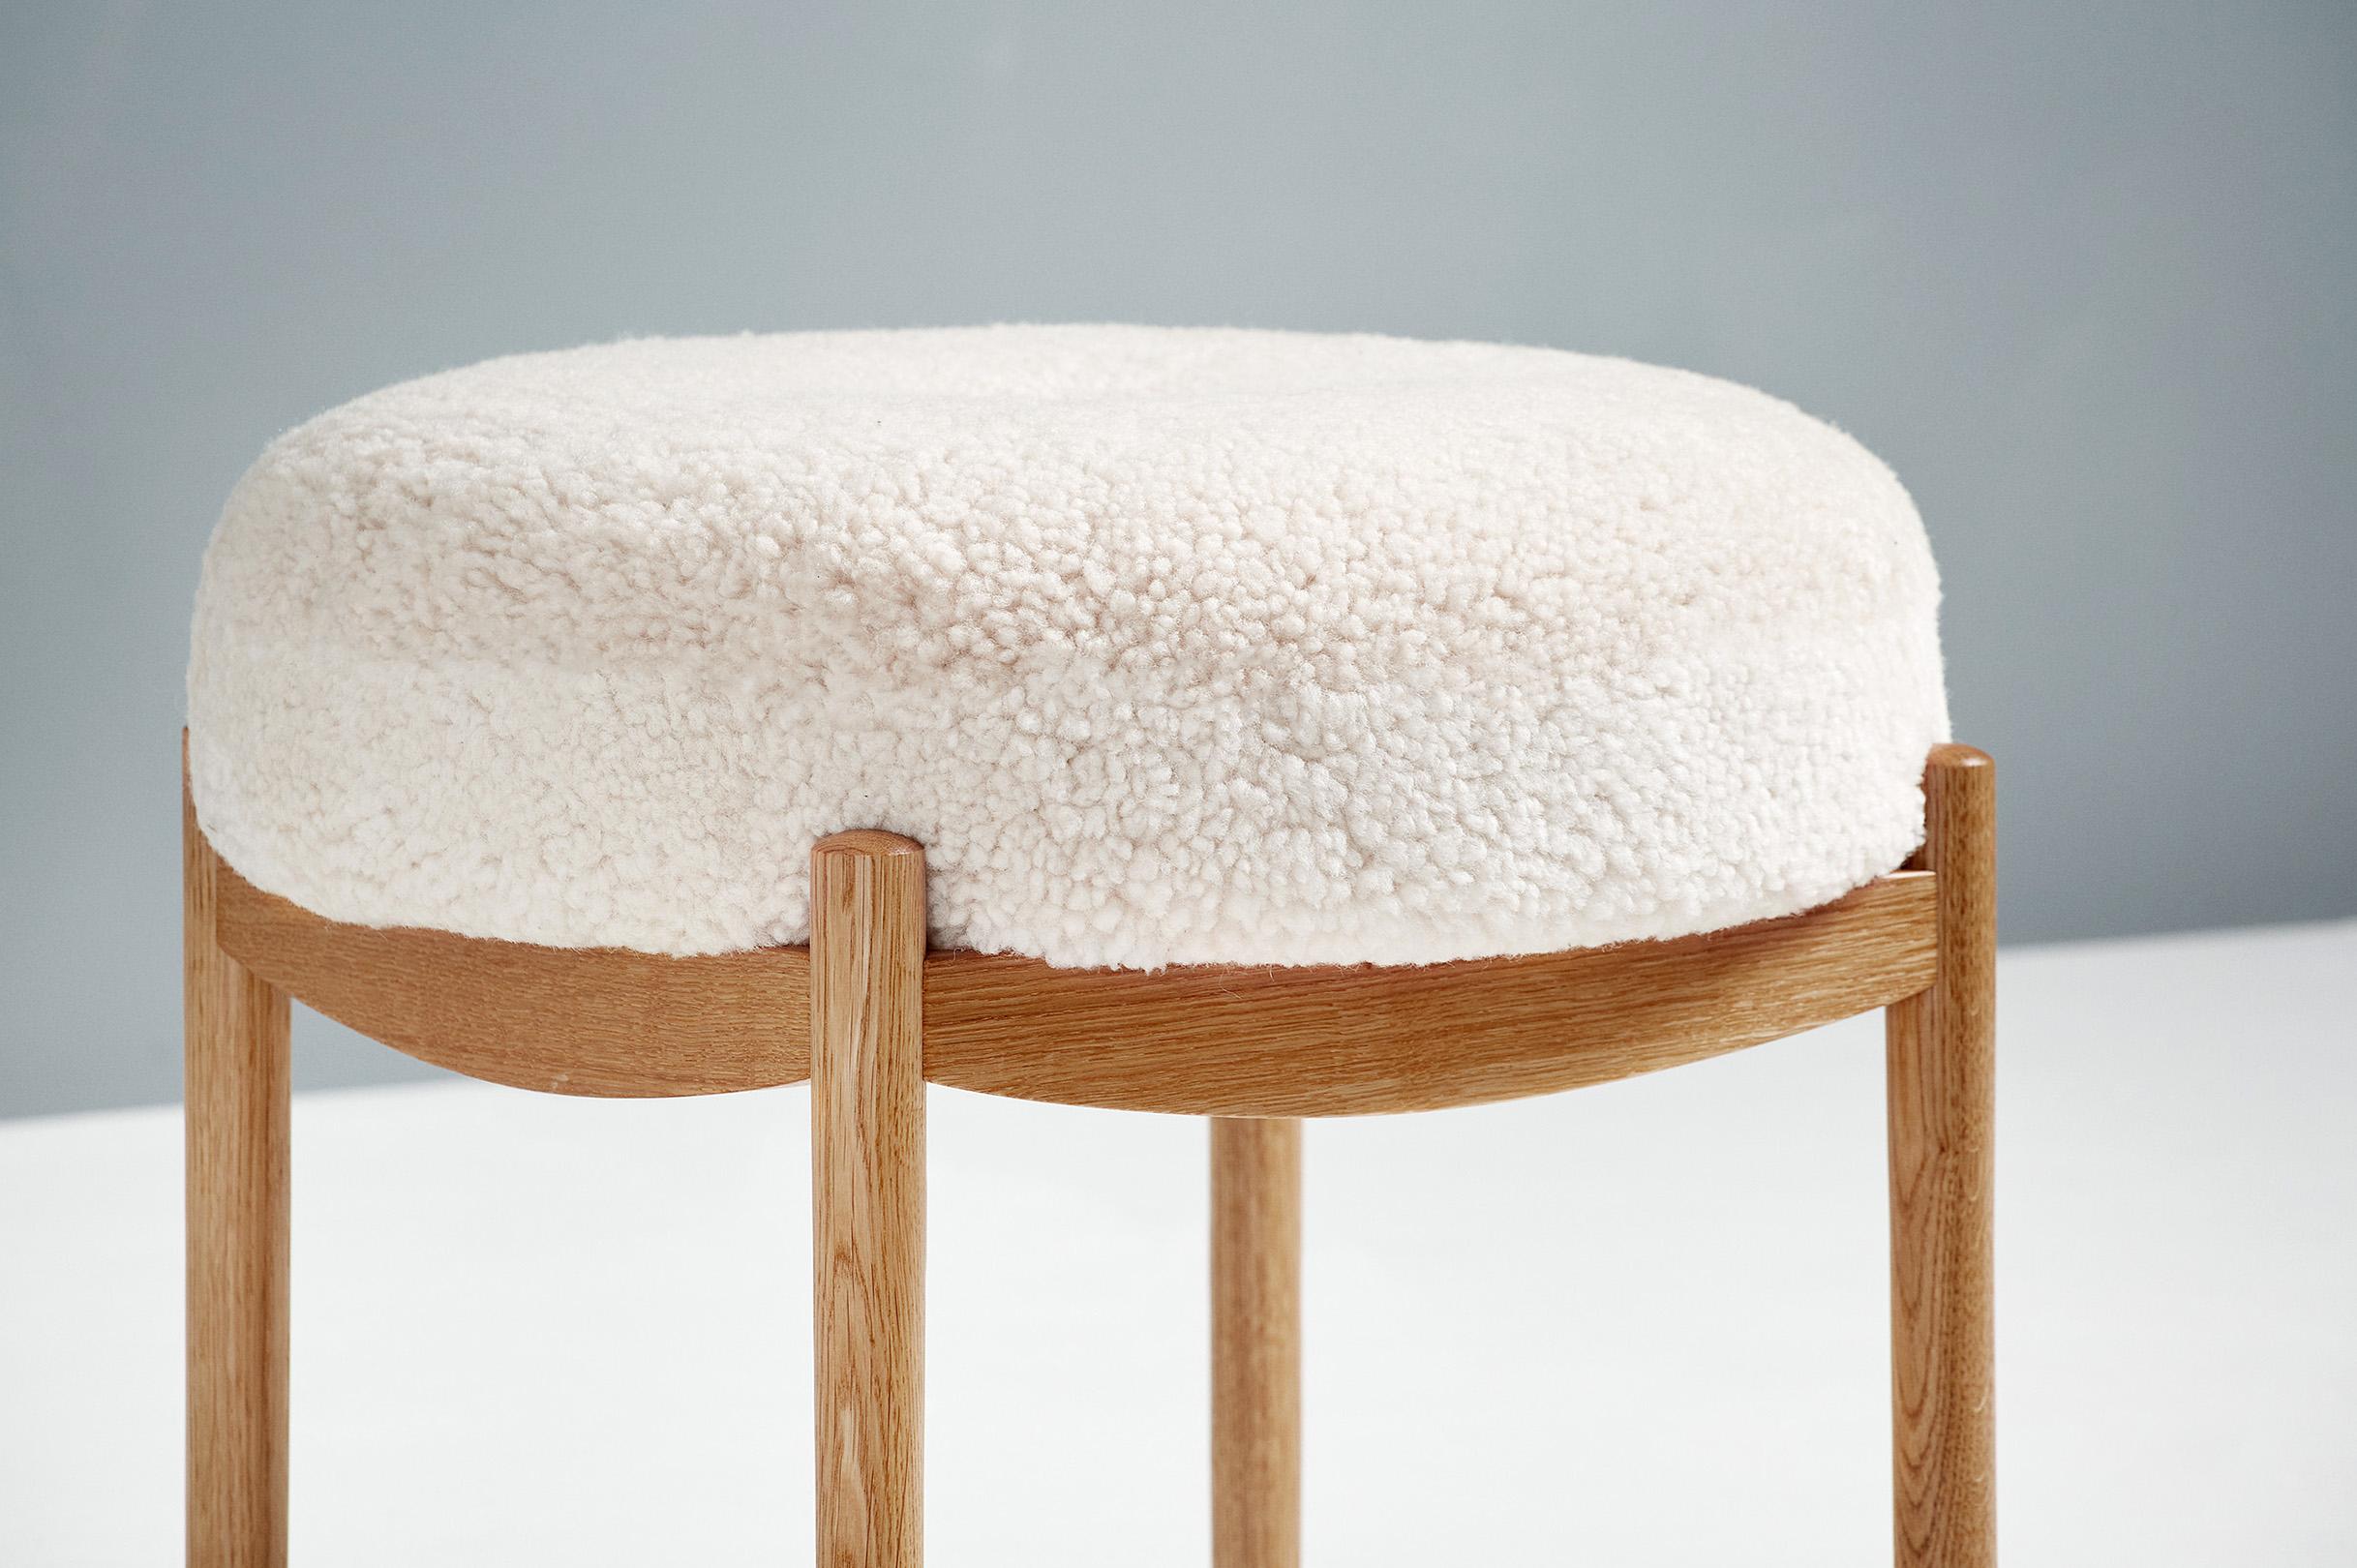 Dagmar design custom-made round ottoman

Custom-made ottoman developed & produced at our workshops in London using the highest quality materials. These ottomans have oiled oak frames and 'Moonlight' sheepskin upholstery. 

This ottoman is